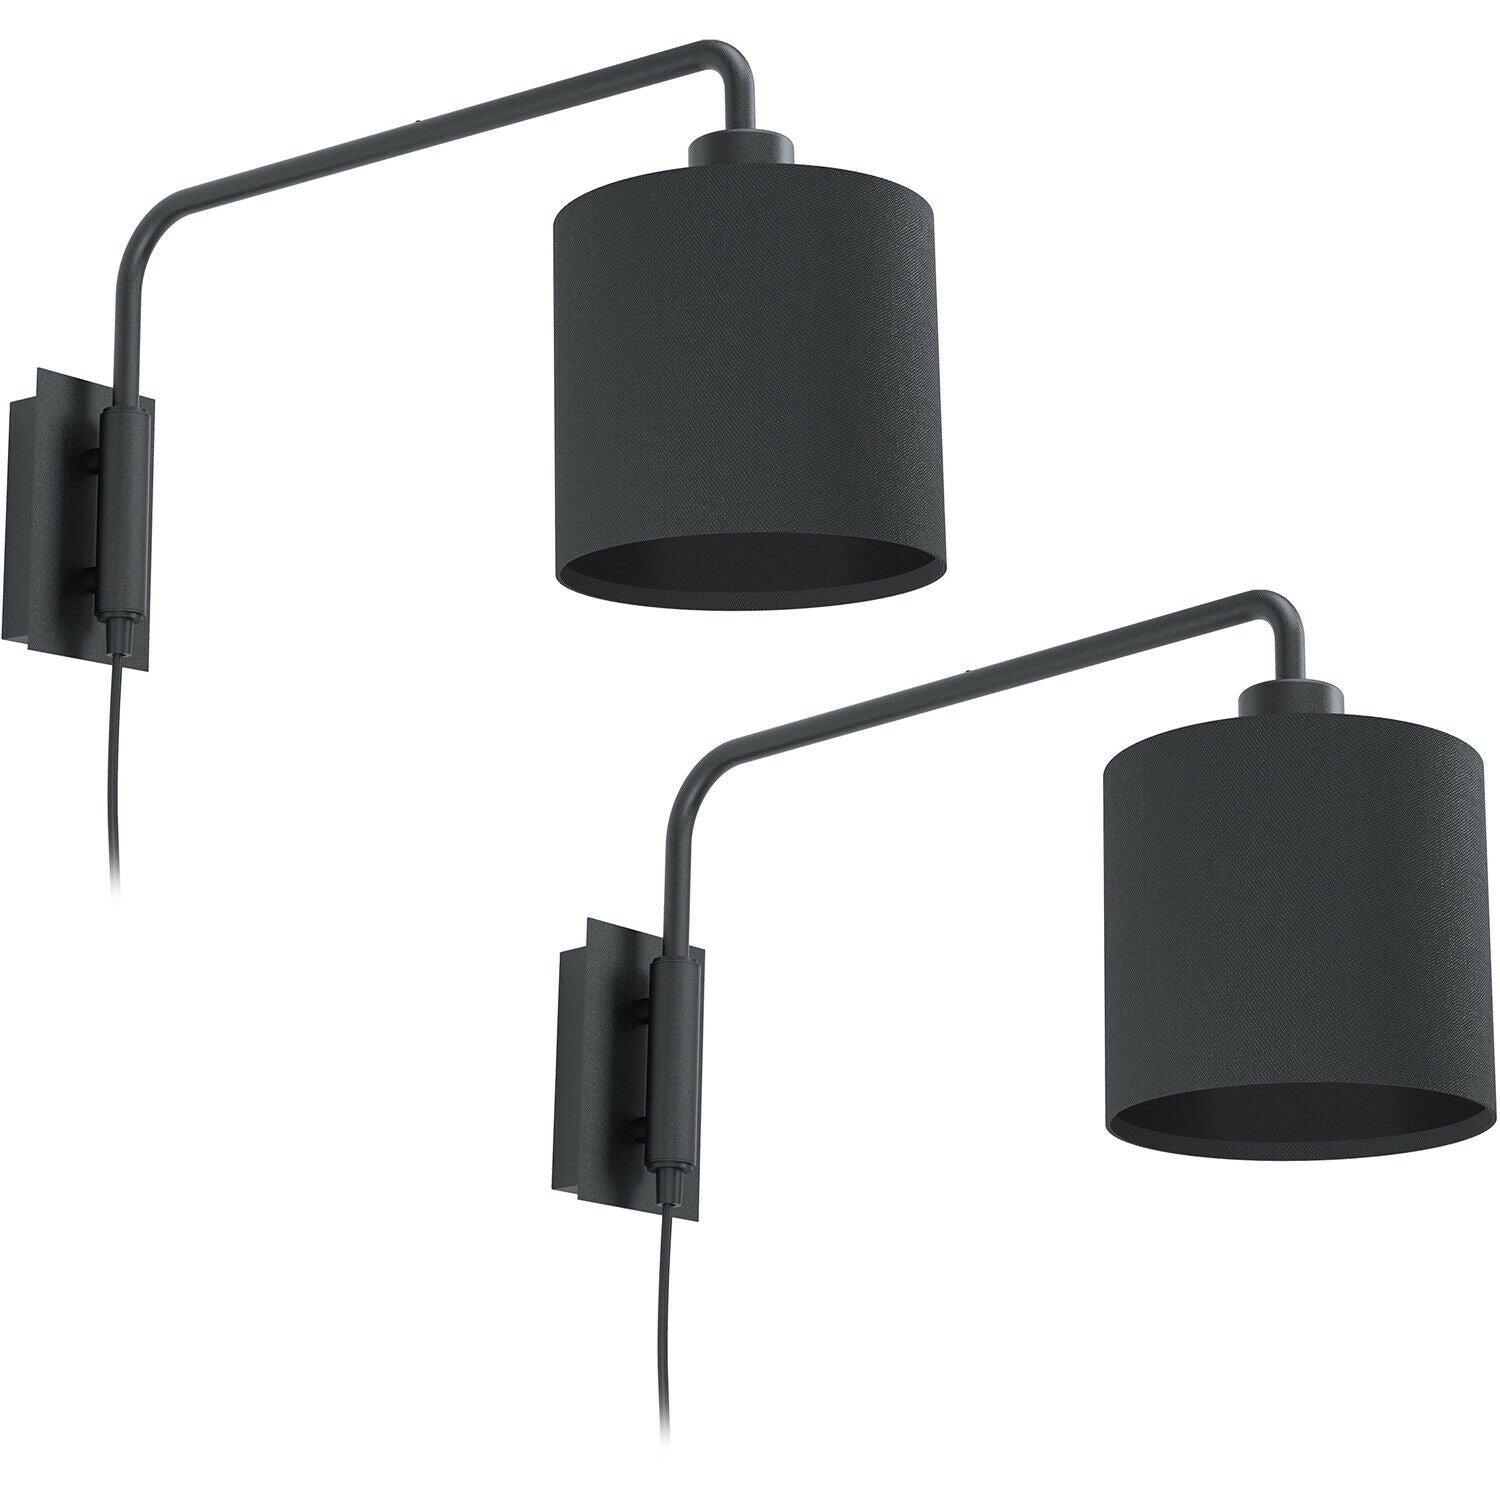 2 PACK Wall Light Colour Black Shade Black Fabric In Line Switch Bulb E27 1x40W